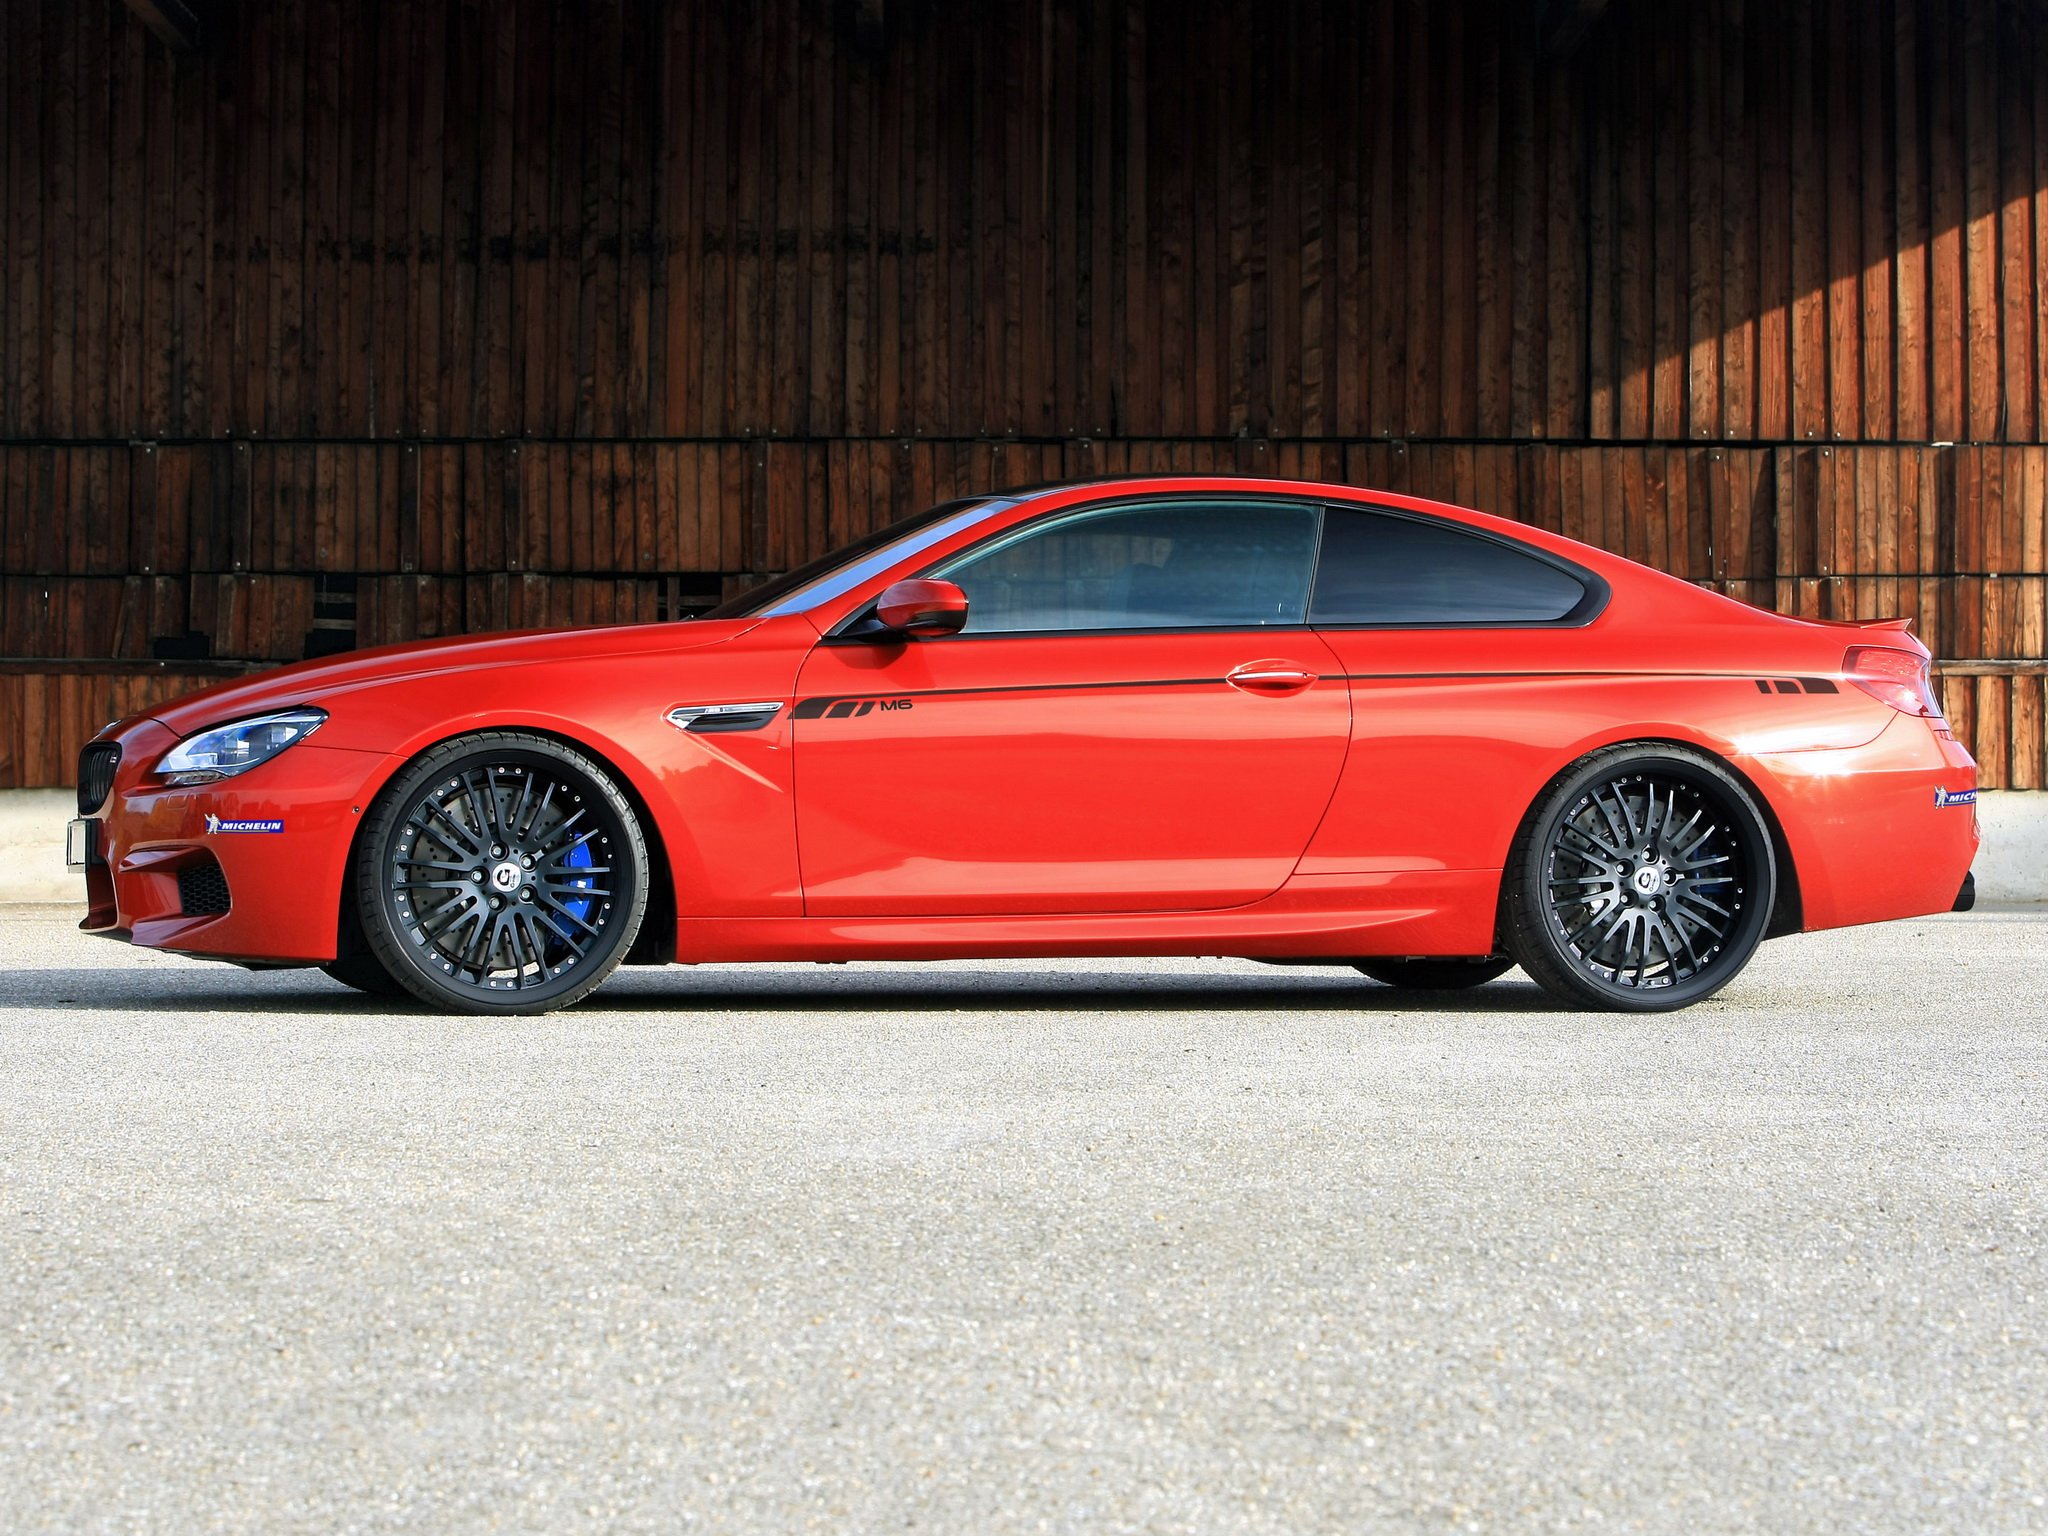 g power, Bmw m6, Coupe, Hurricane,  f13 , Cars, Modified, 2013 Wallpaper